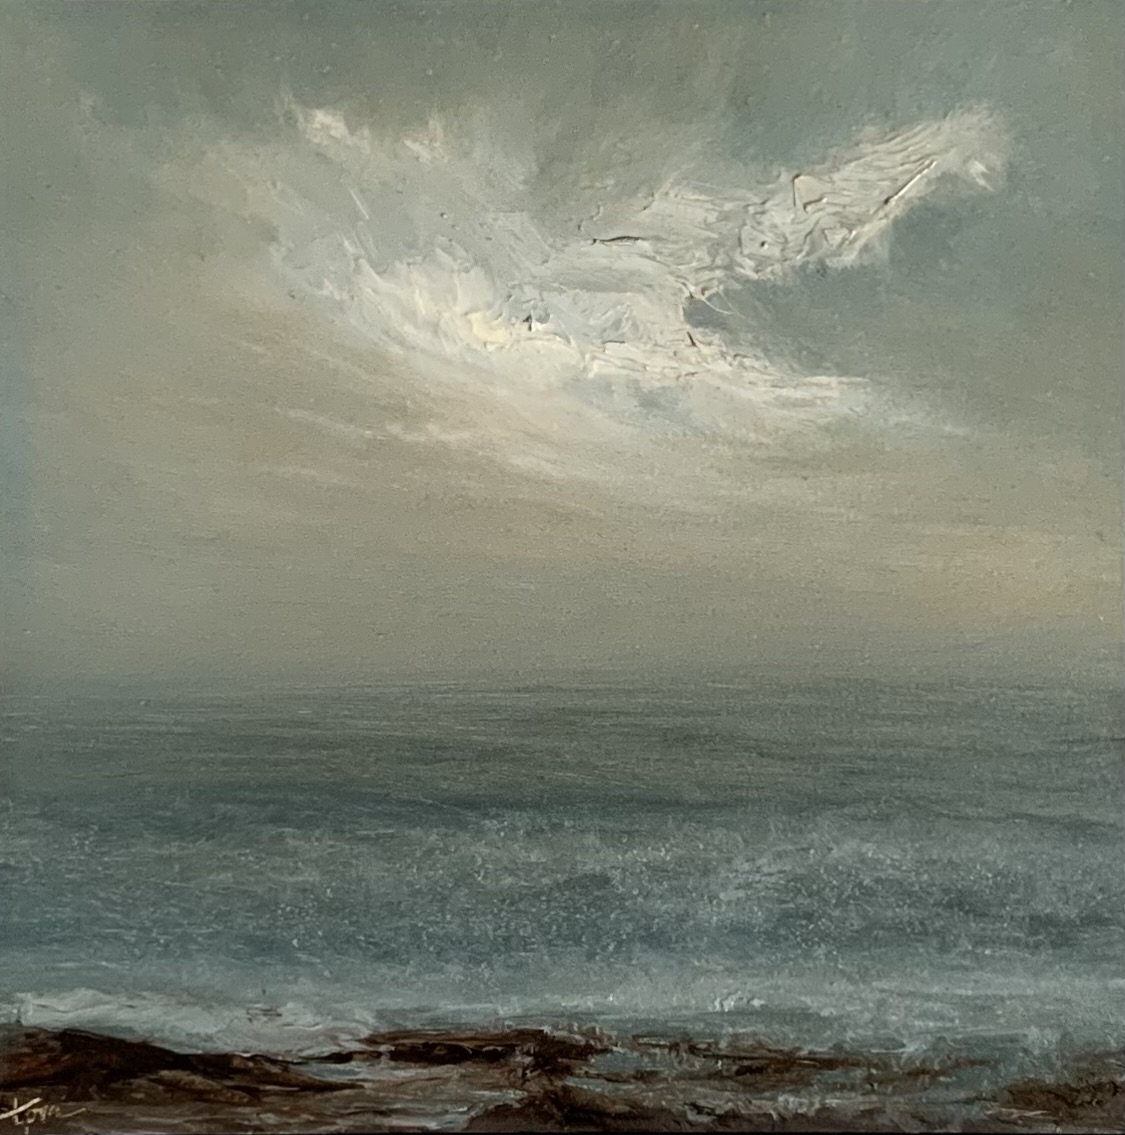 Original oil painting by Tisha Mark, "Week 20, 52 Weeks of Finding Light Series" 5"x5" oil on cradled board (2023). This painting is a small seascape that interprets the moment when light first emerges after a storm over the sea.